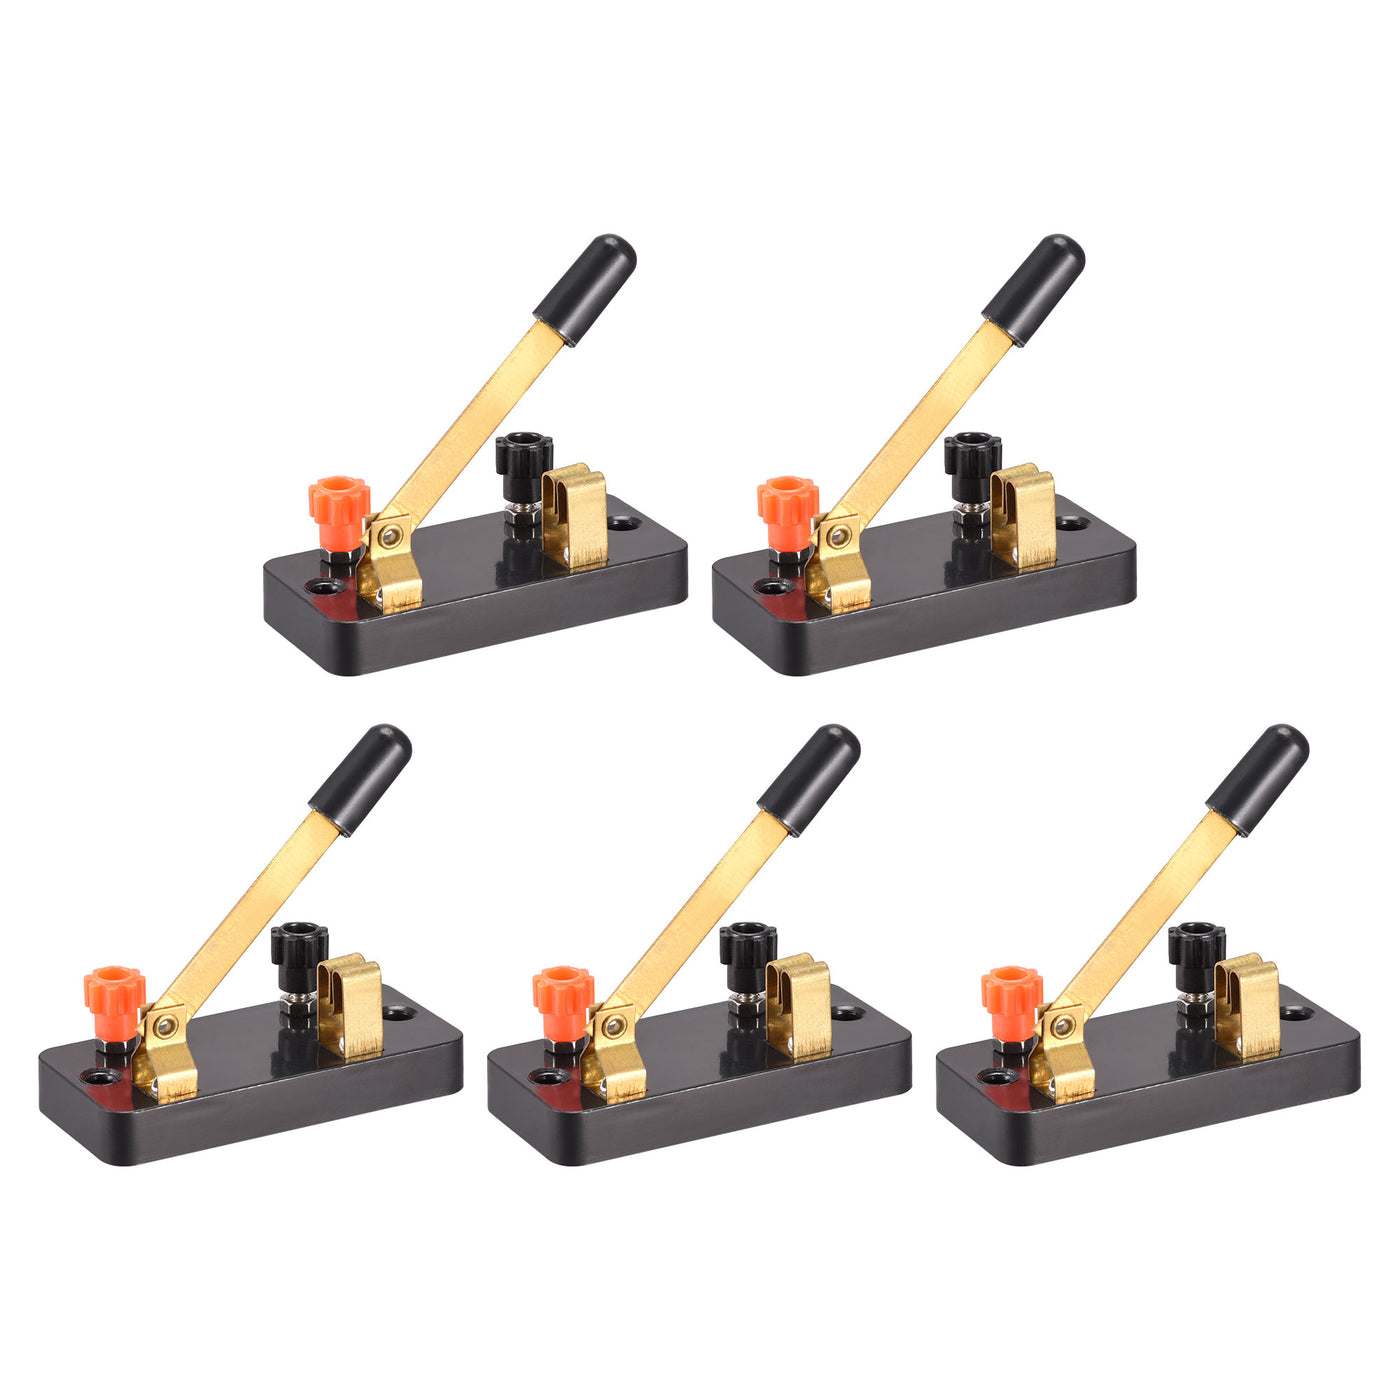 uxcell Uxcell Single Pole Switch Single Pole Single Throw Switch, Black Red Copper Tone, 5Pcs